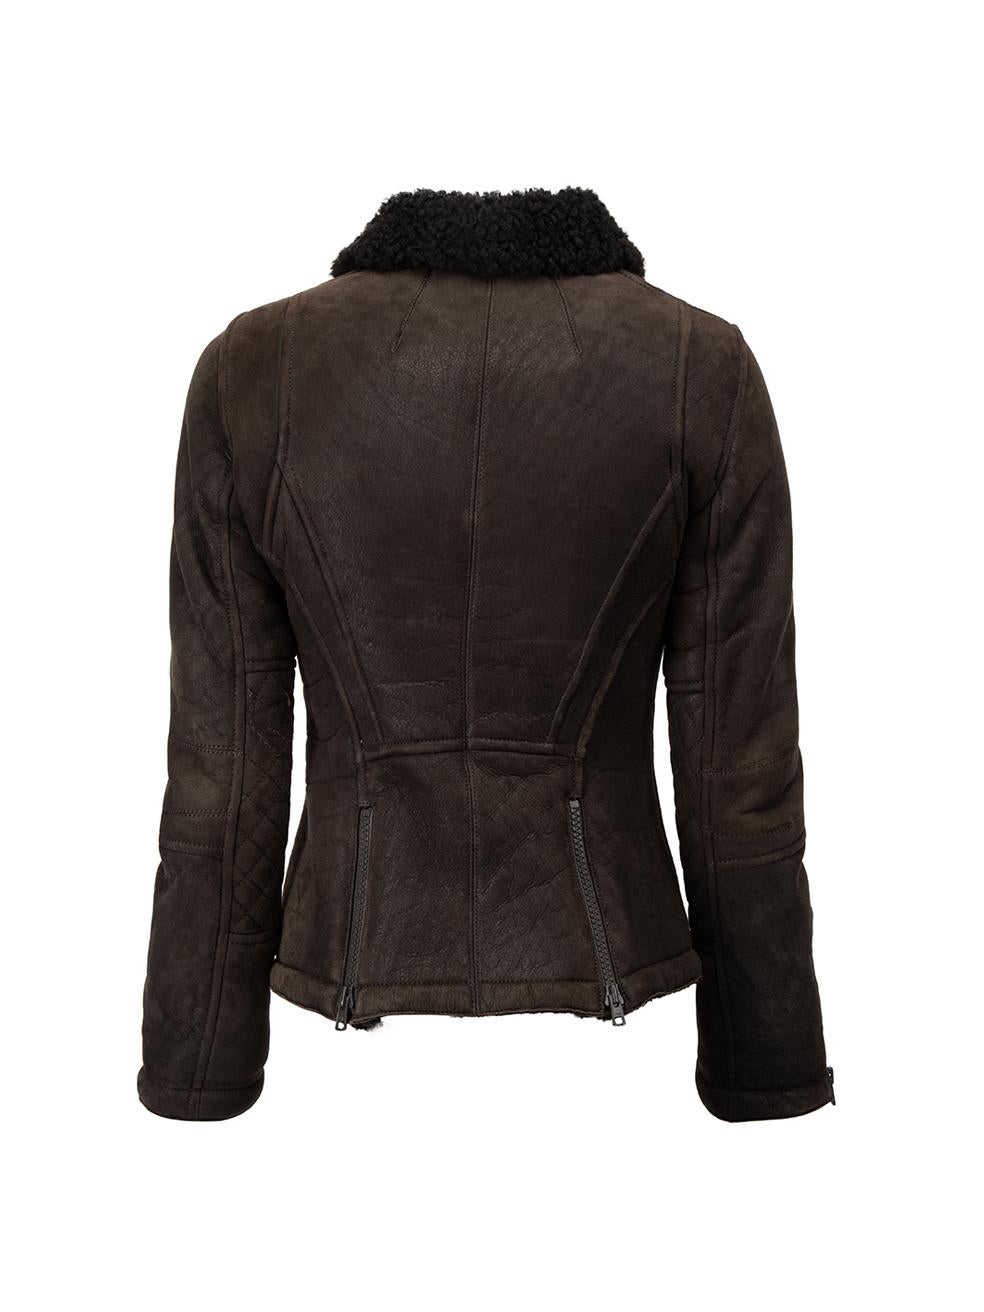 Pre-Loved Gerard Darel Women's Brown Suede Shearling Lined Jacket In Excellent Condition In London, GB